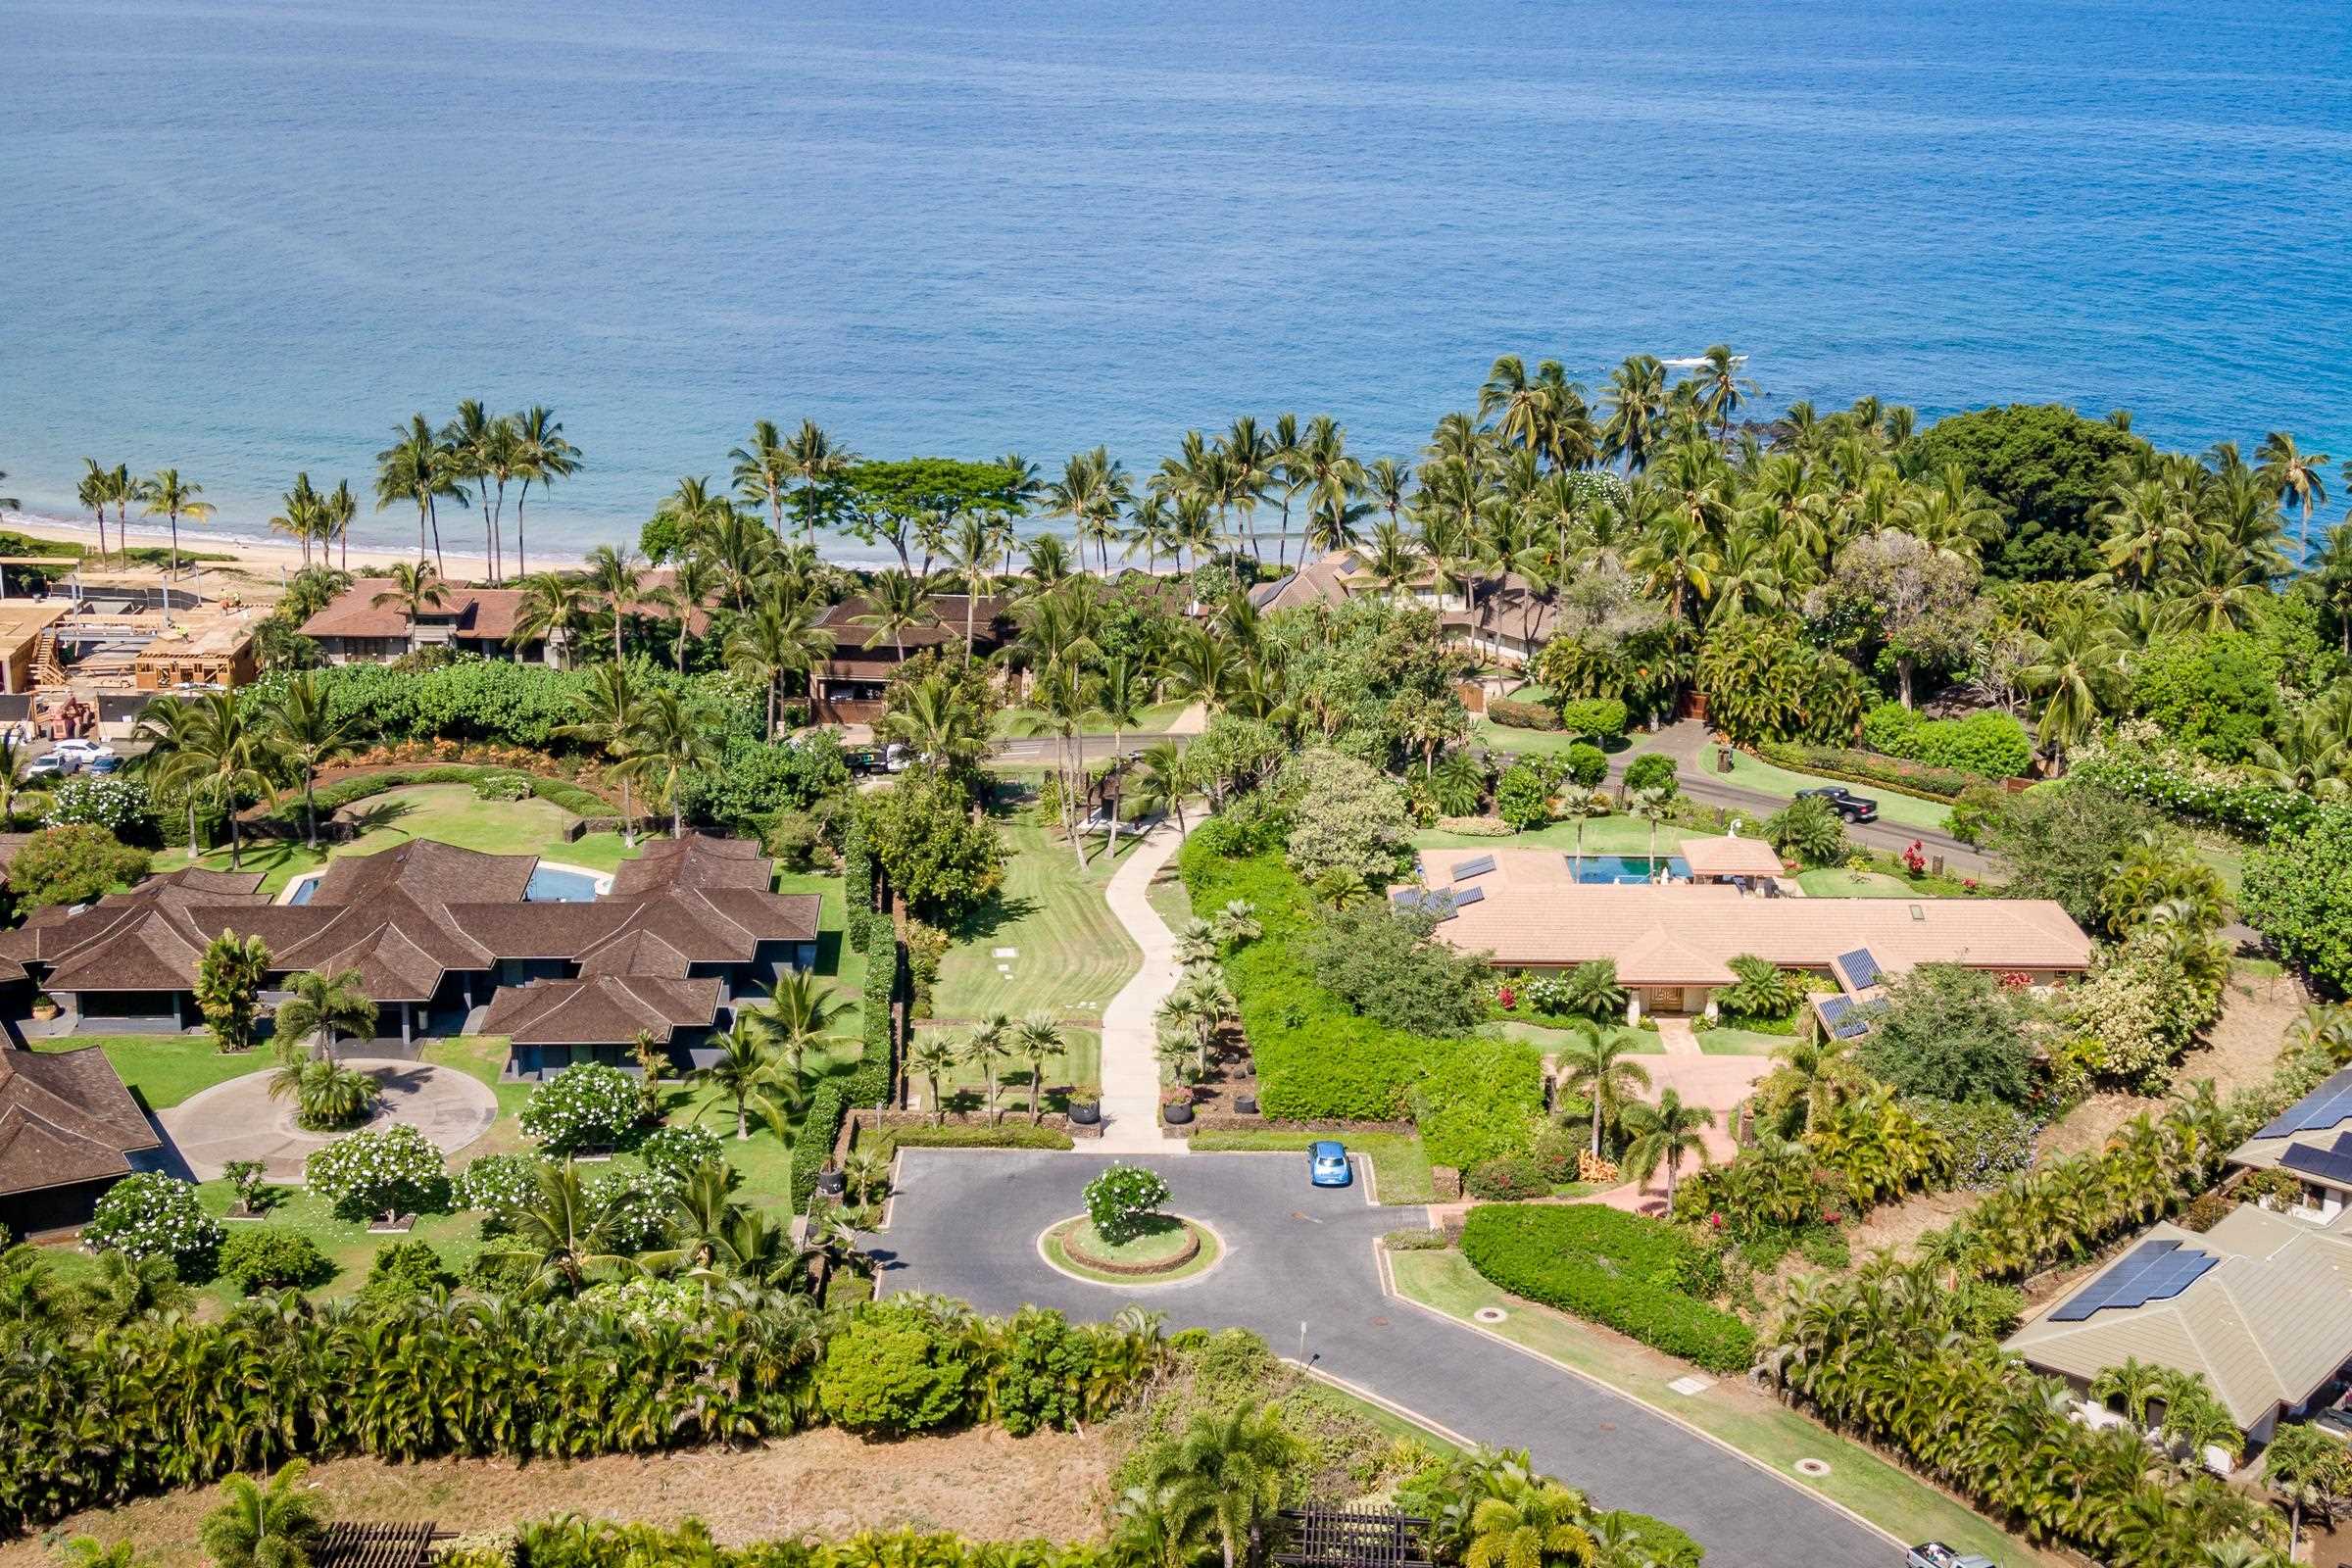 21 Ualei Pl 1 Kihei, Hi vacant land for sale - photo 22 of 29